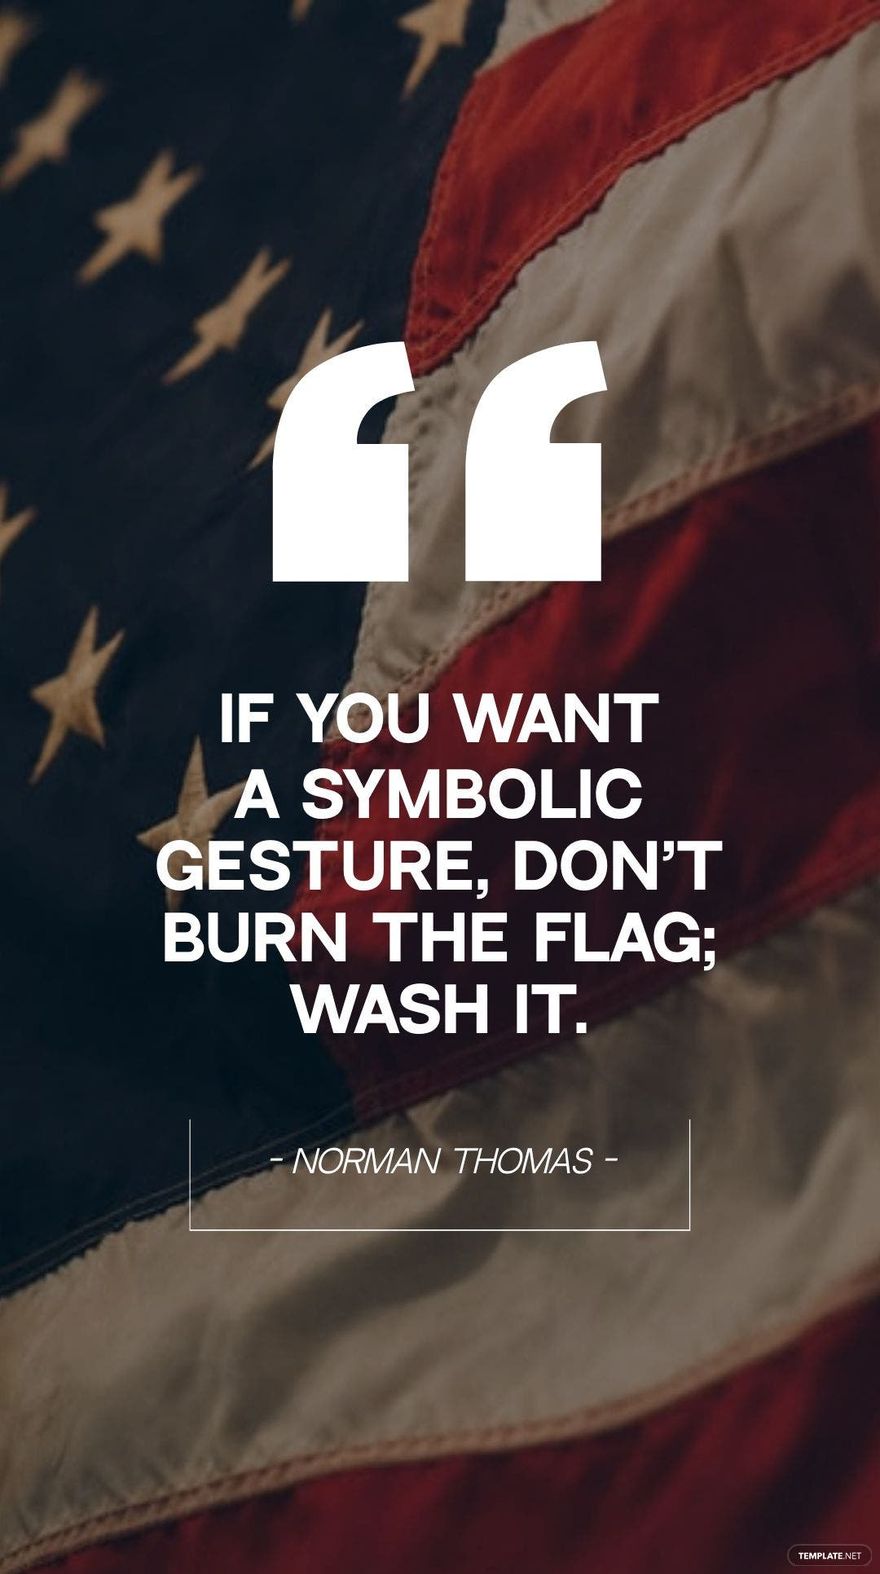 Free Norman Thomas - If you want a symbolic gesture, don’t burn the flag; wash it. in JPG